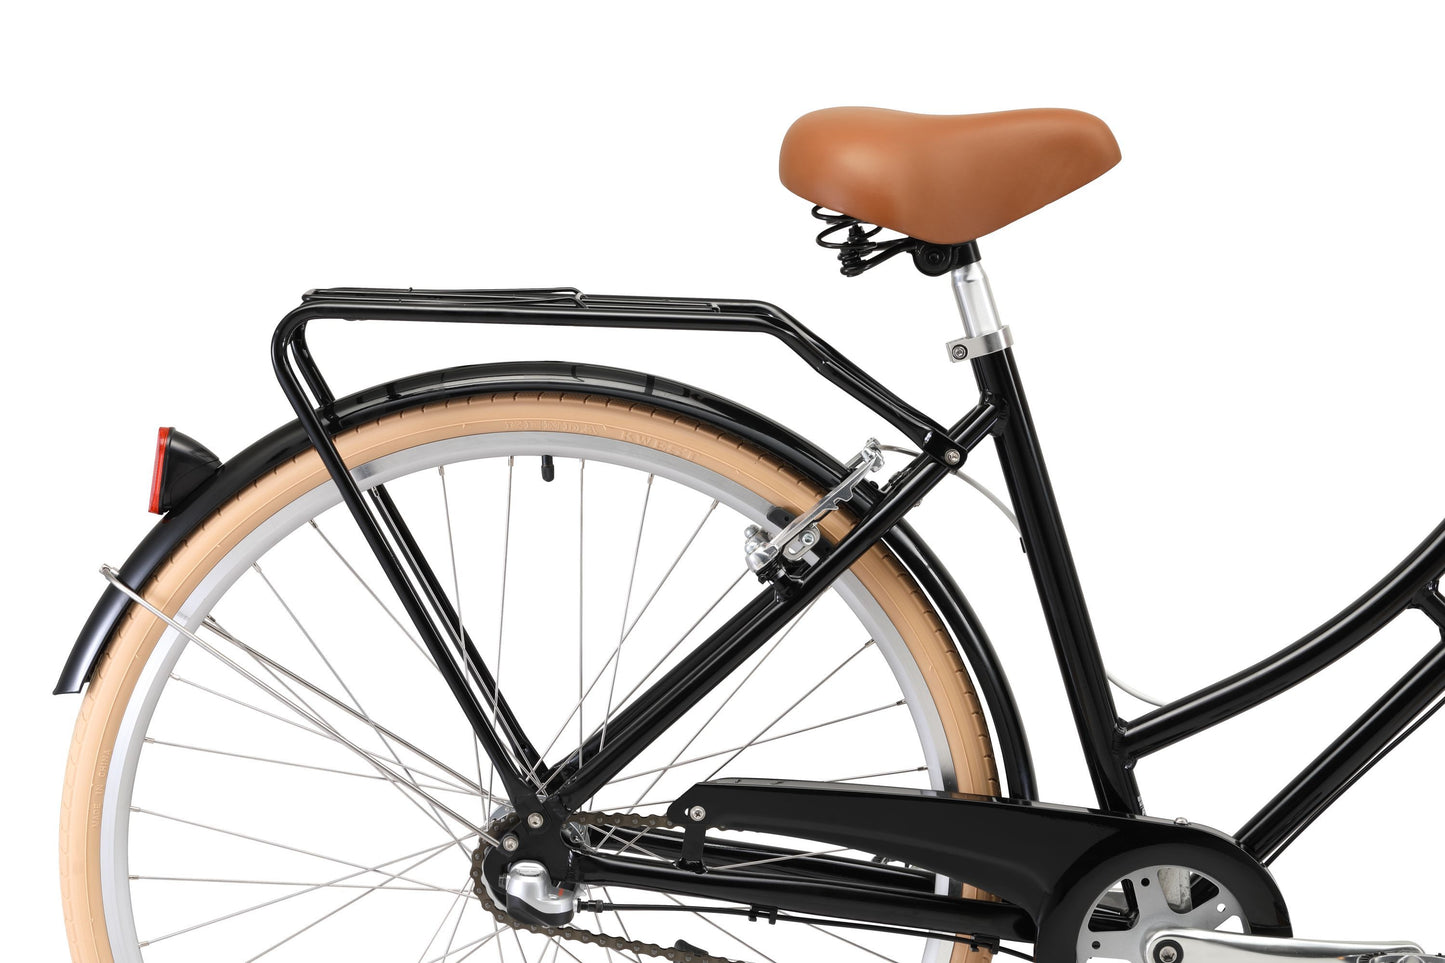 Ladies Deluxe Vintage Bike in Black showing rear mudguard and red reflector from Reid Cycles Australia